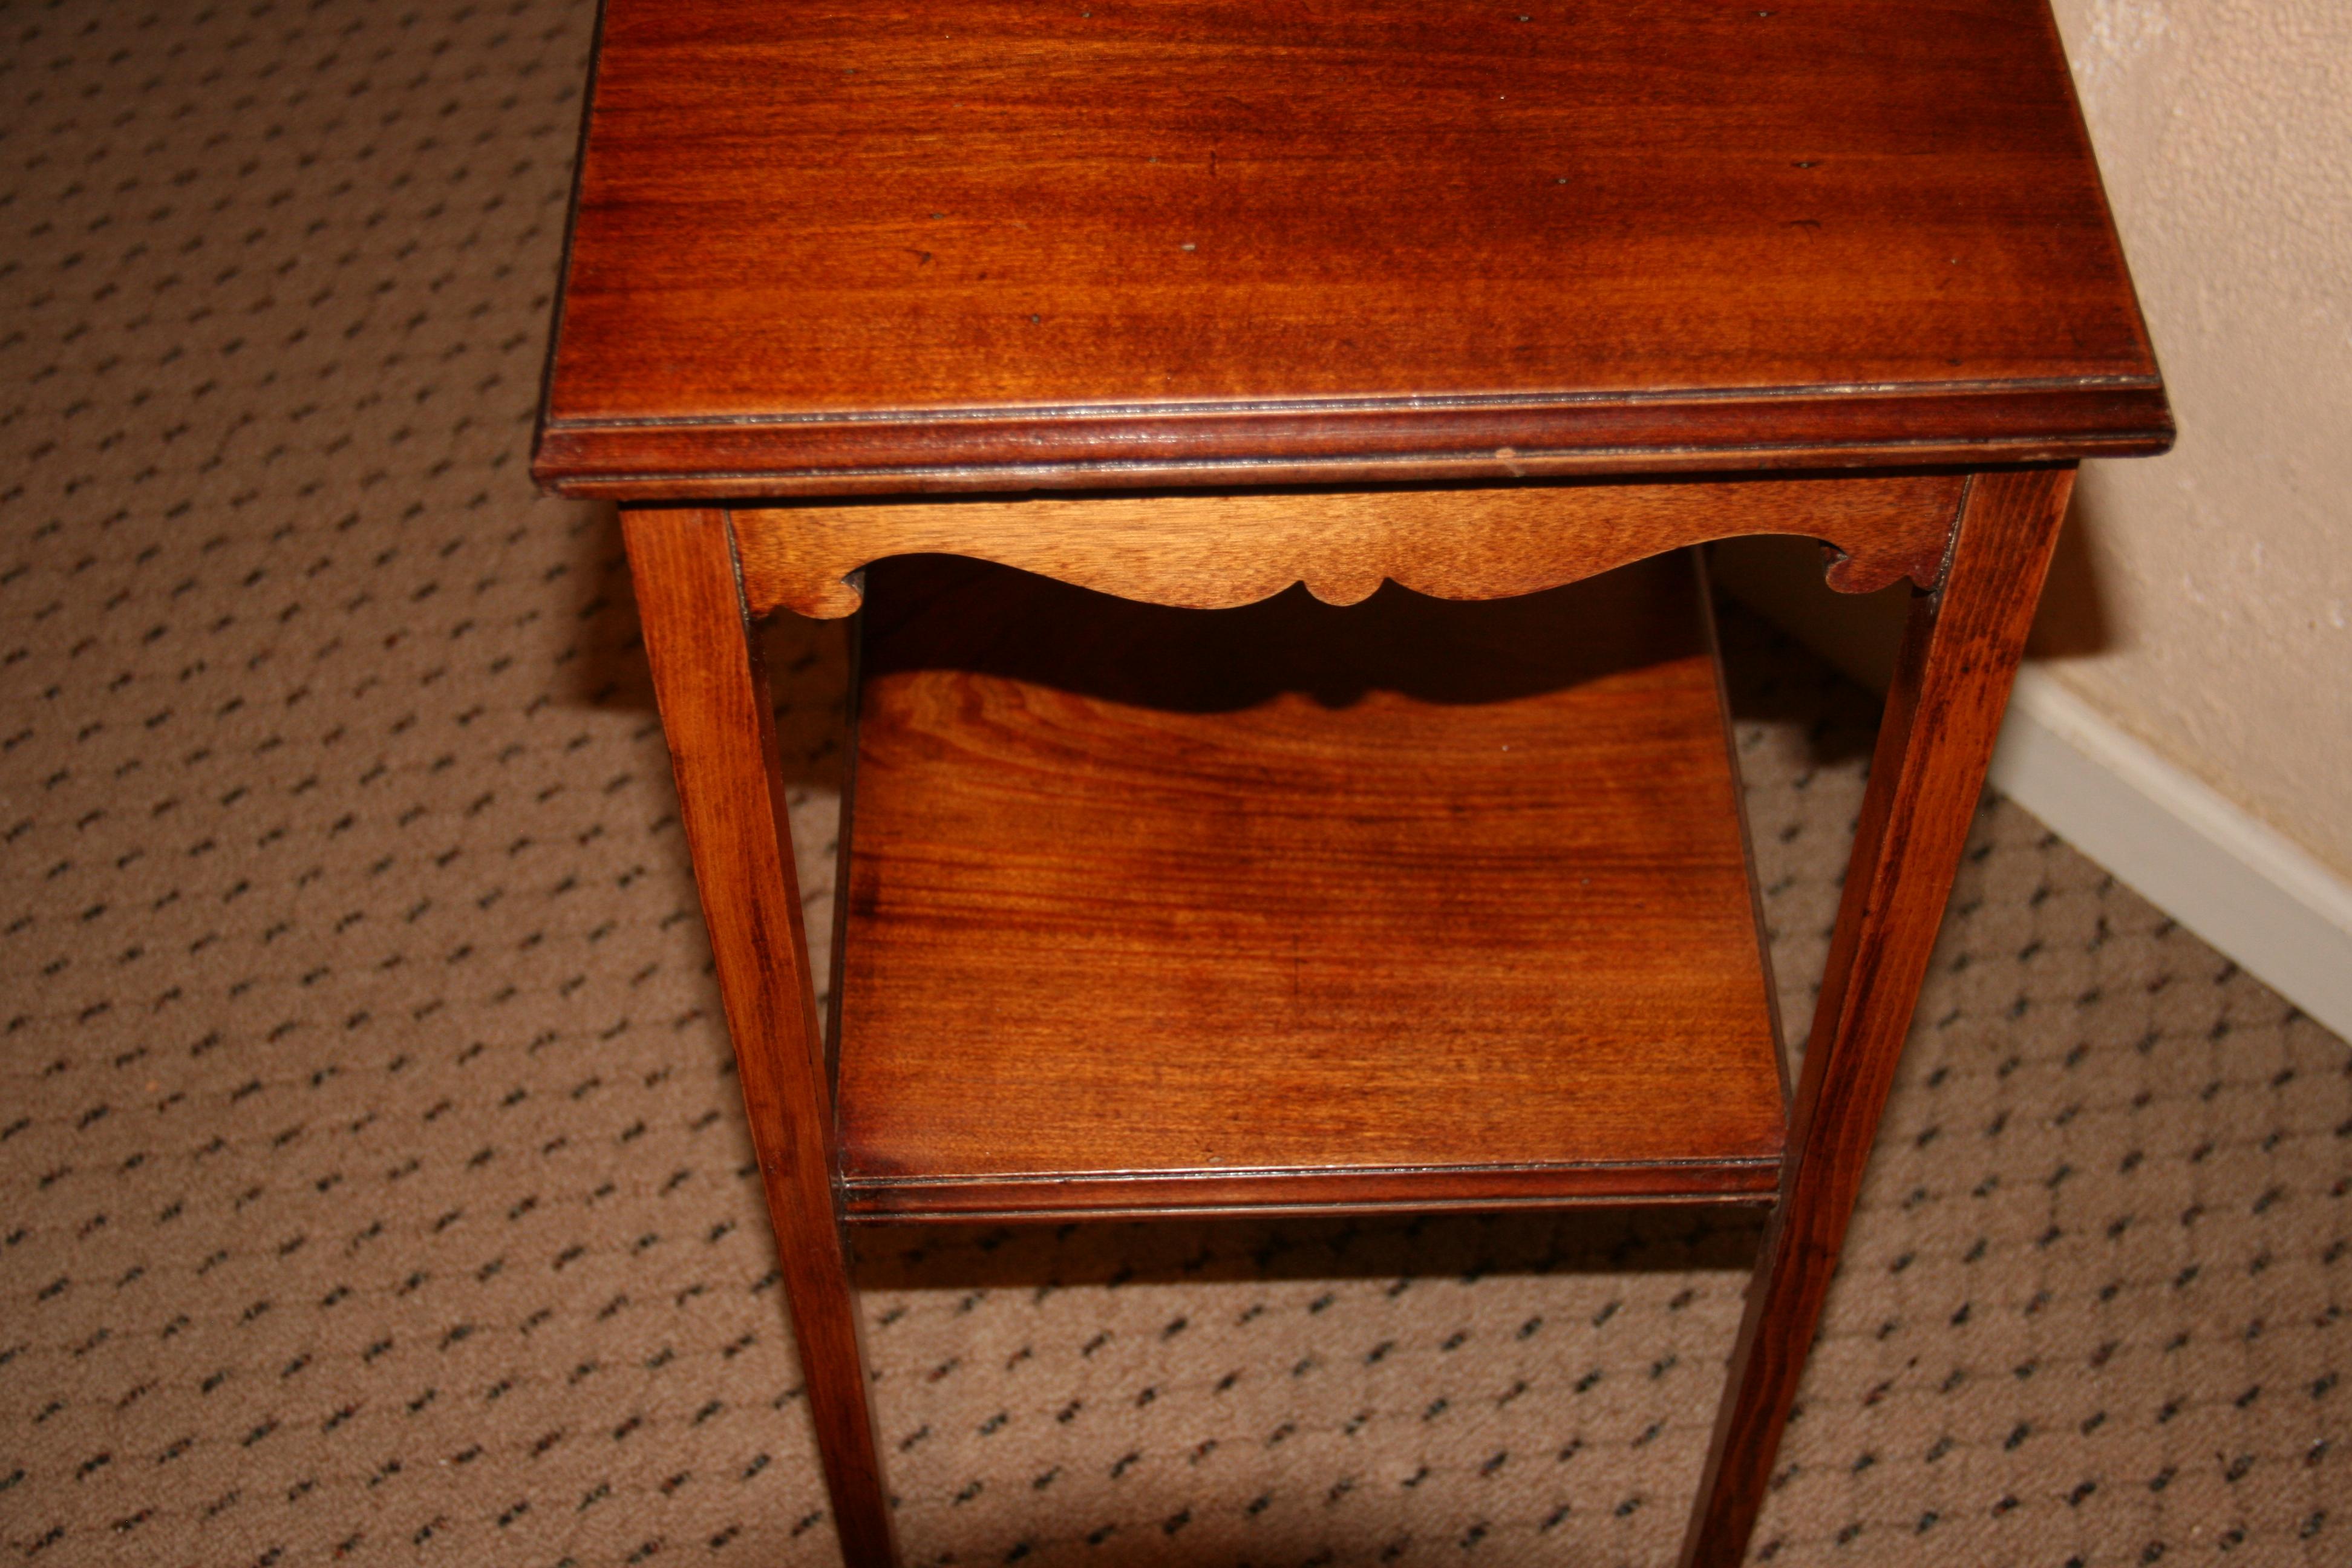 Hand-Crafted English Walnut Two Level Scalloped  Spider Leg Table / Pedestal 1920's For Sale